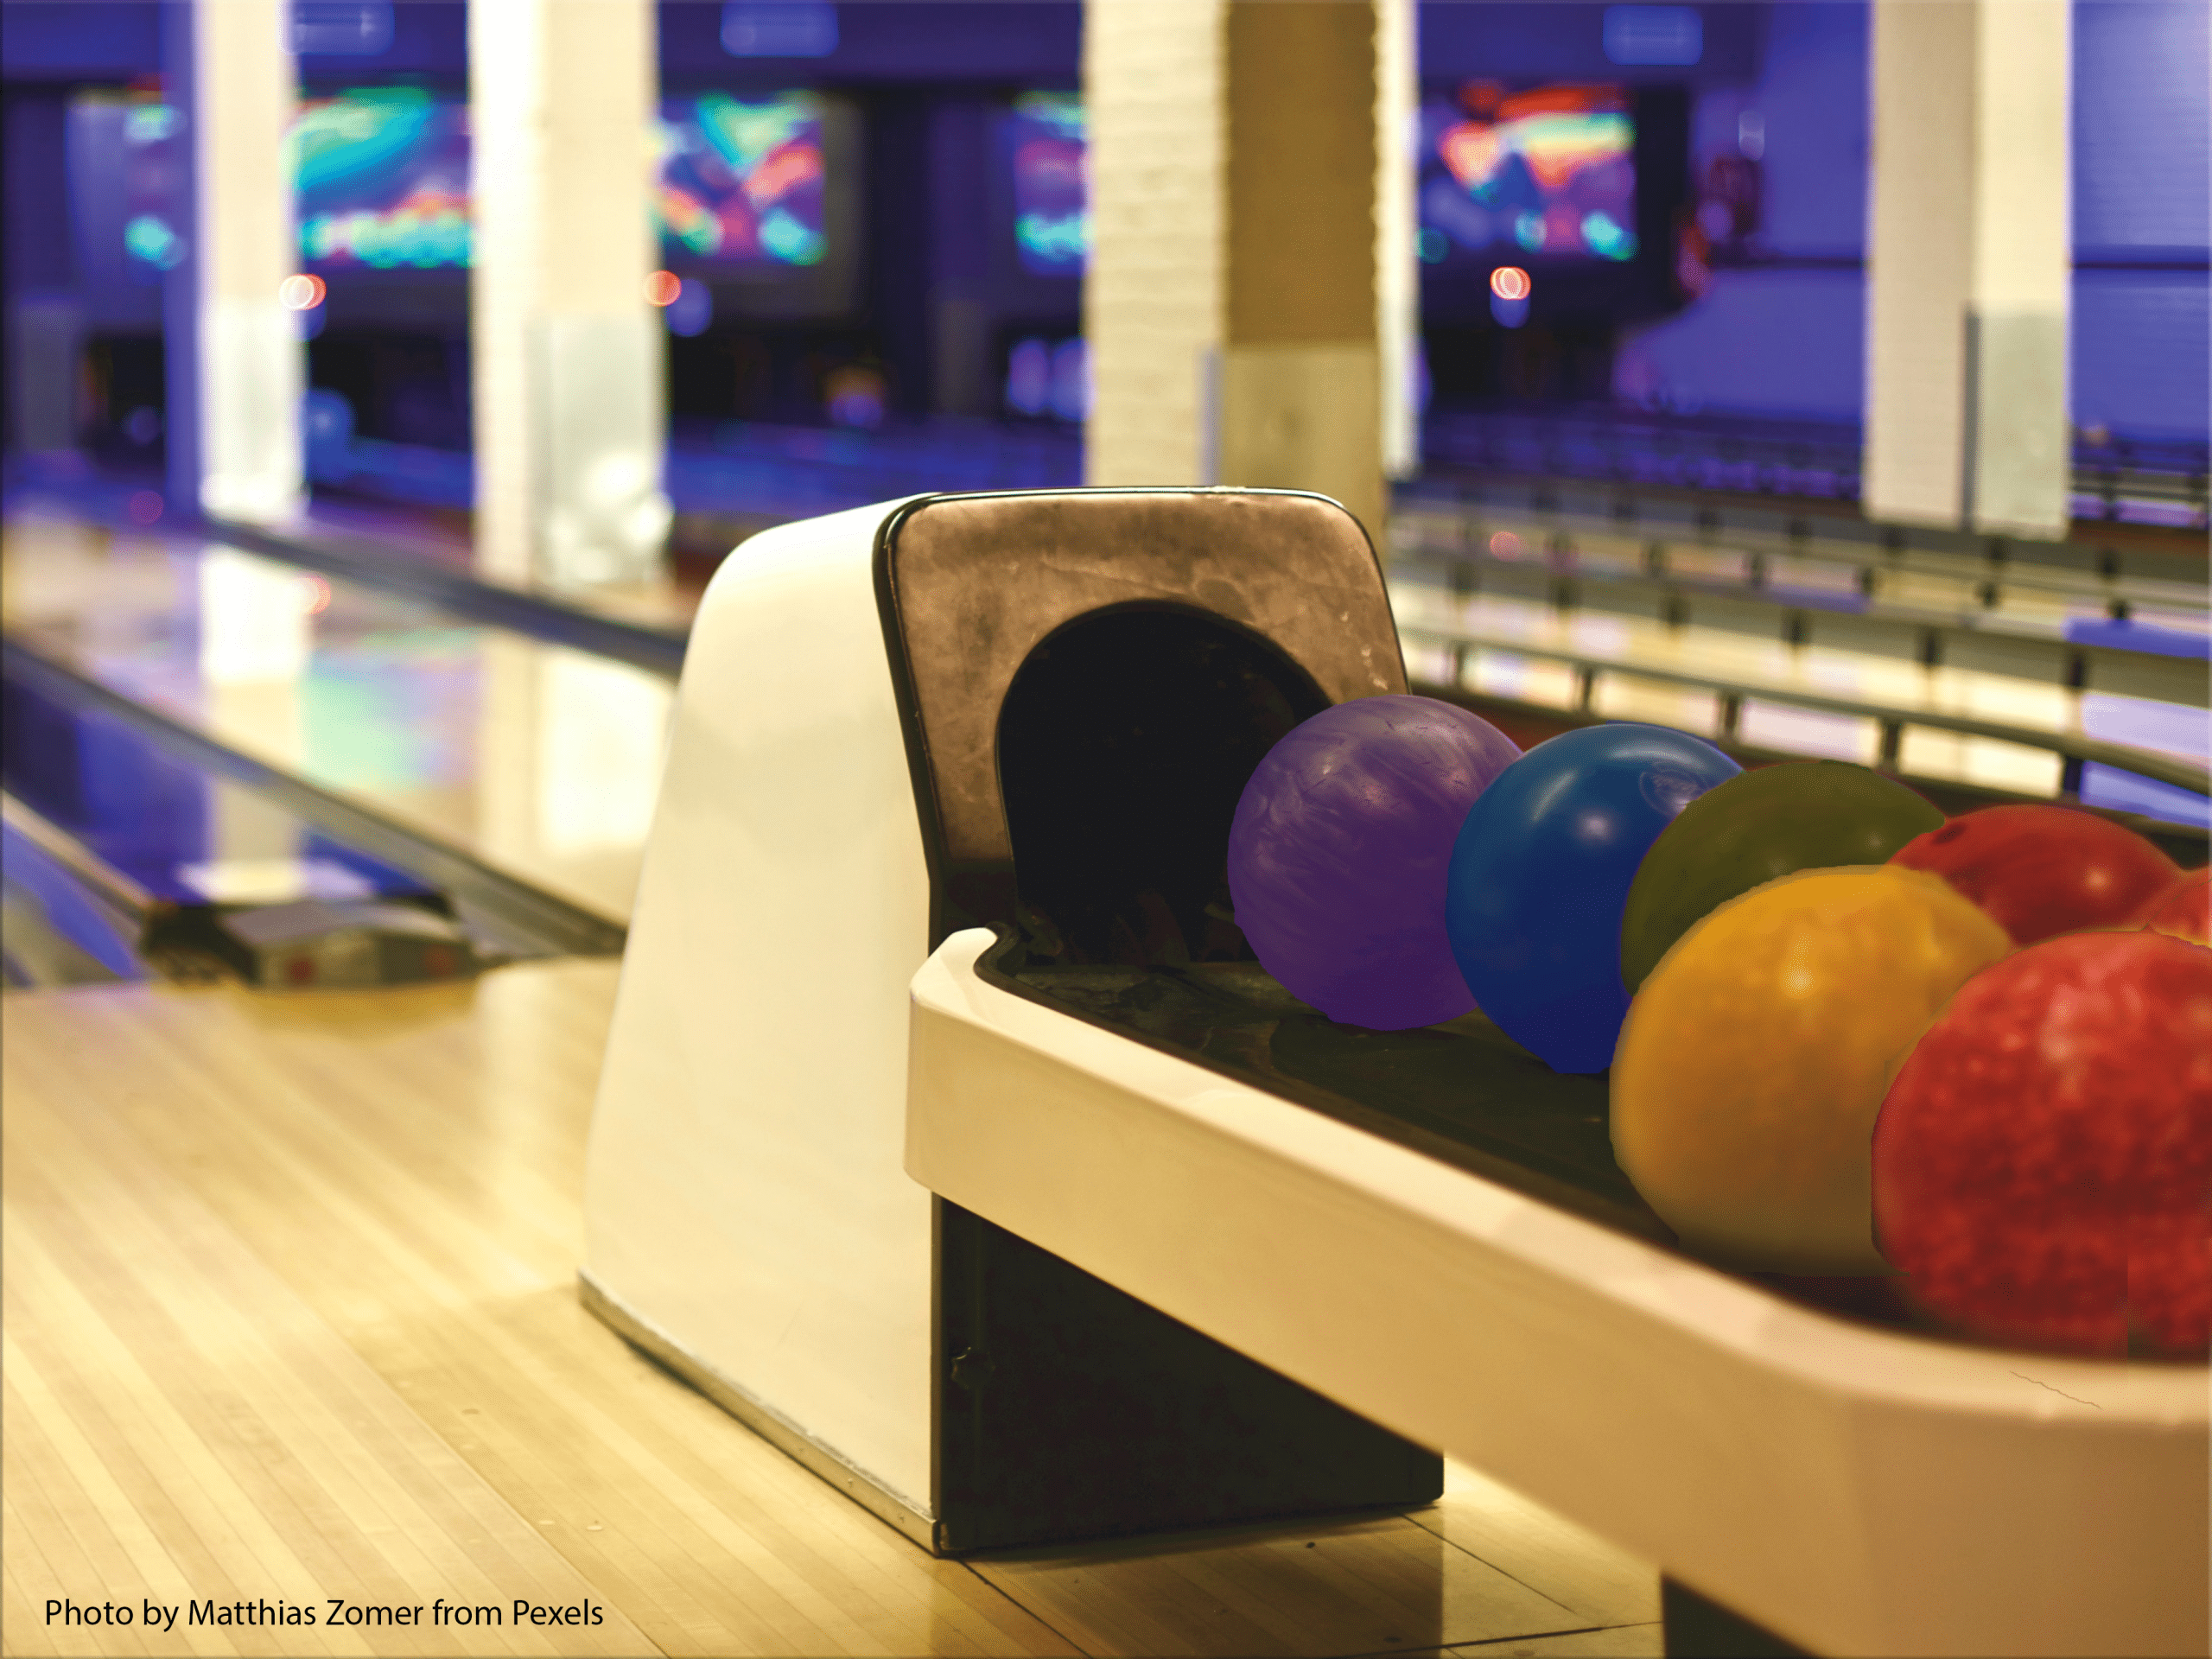 Bowling balls in rainbow colors at a bowling alley